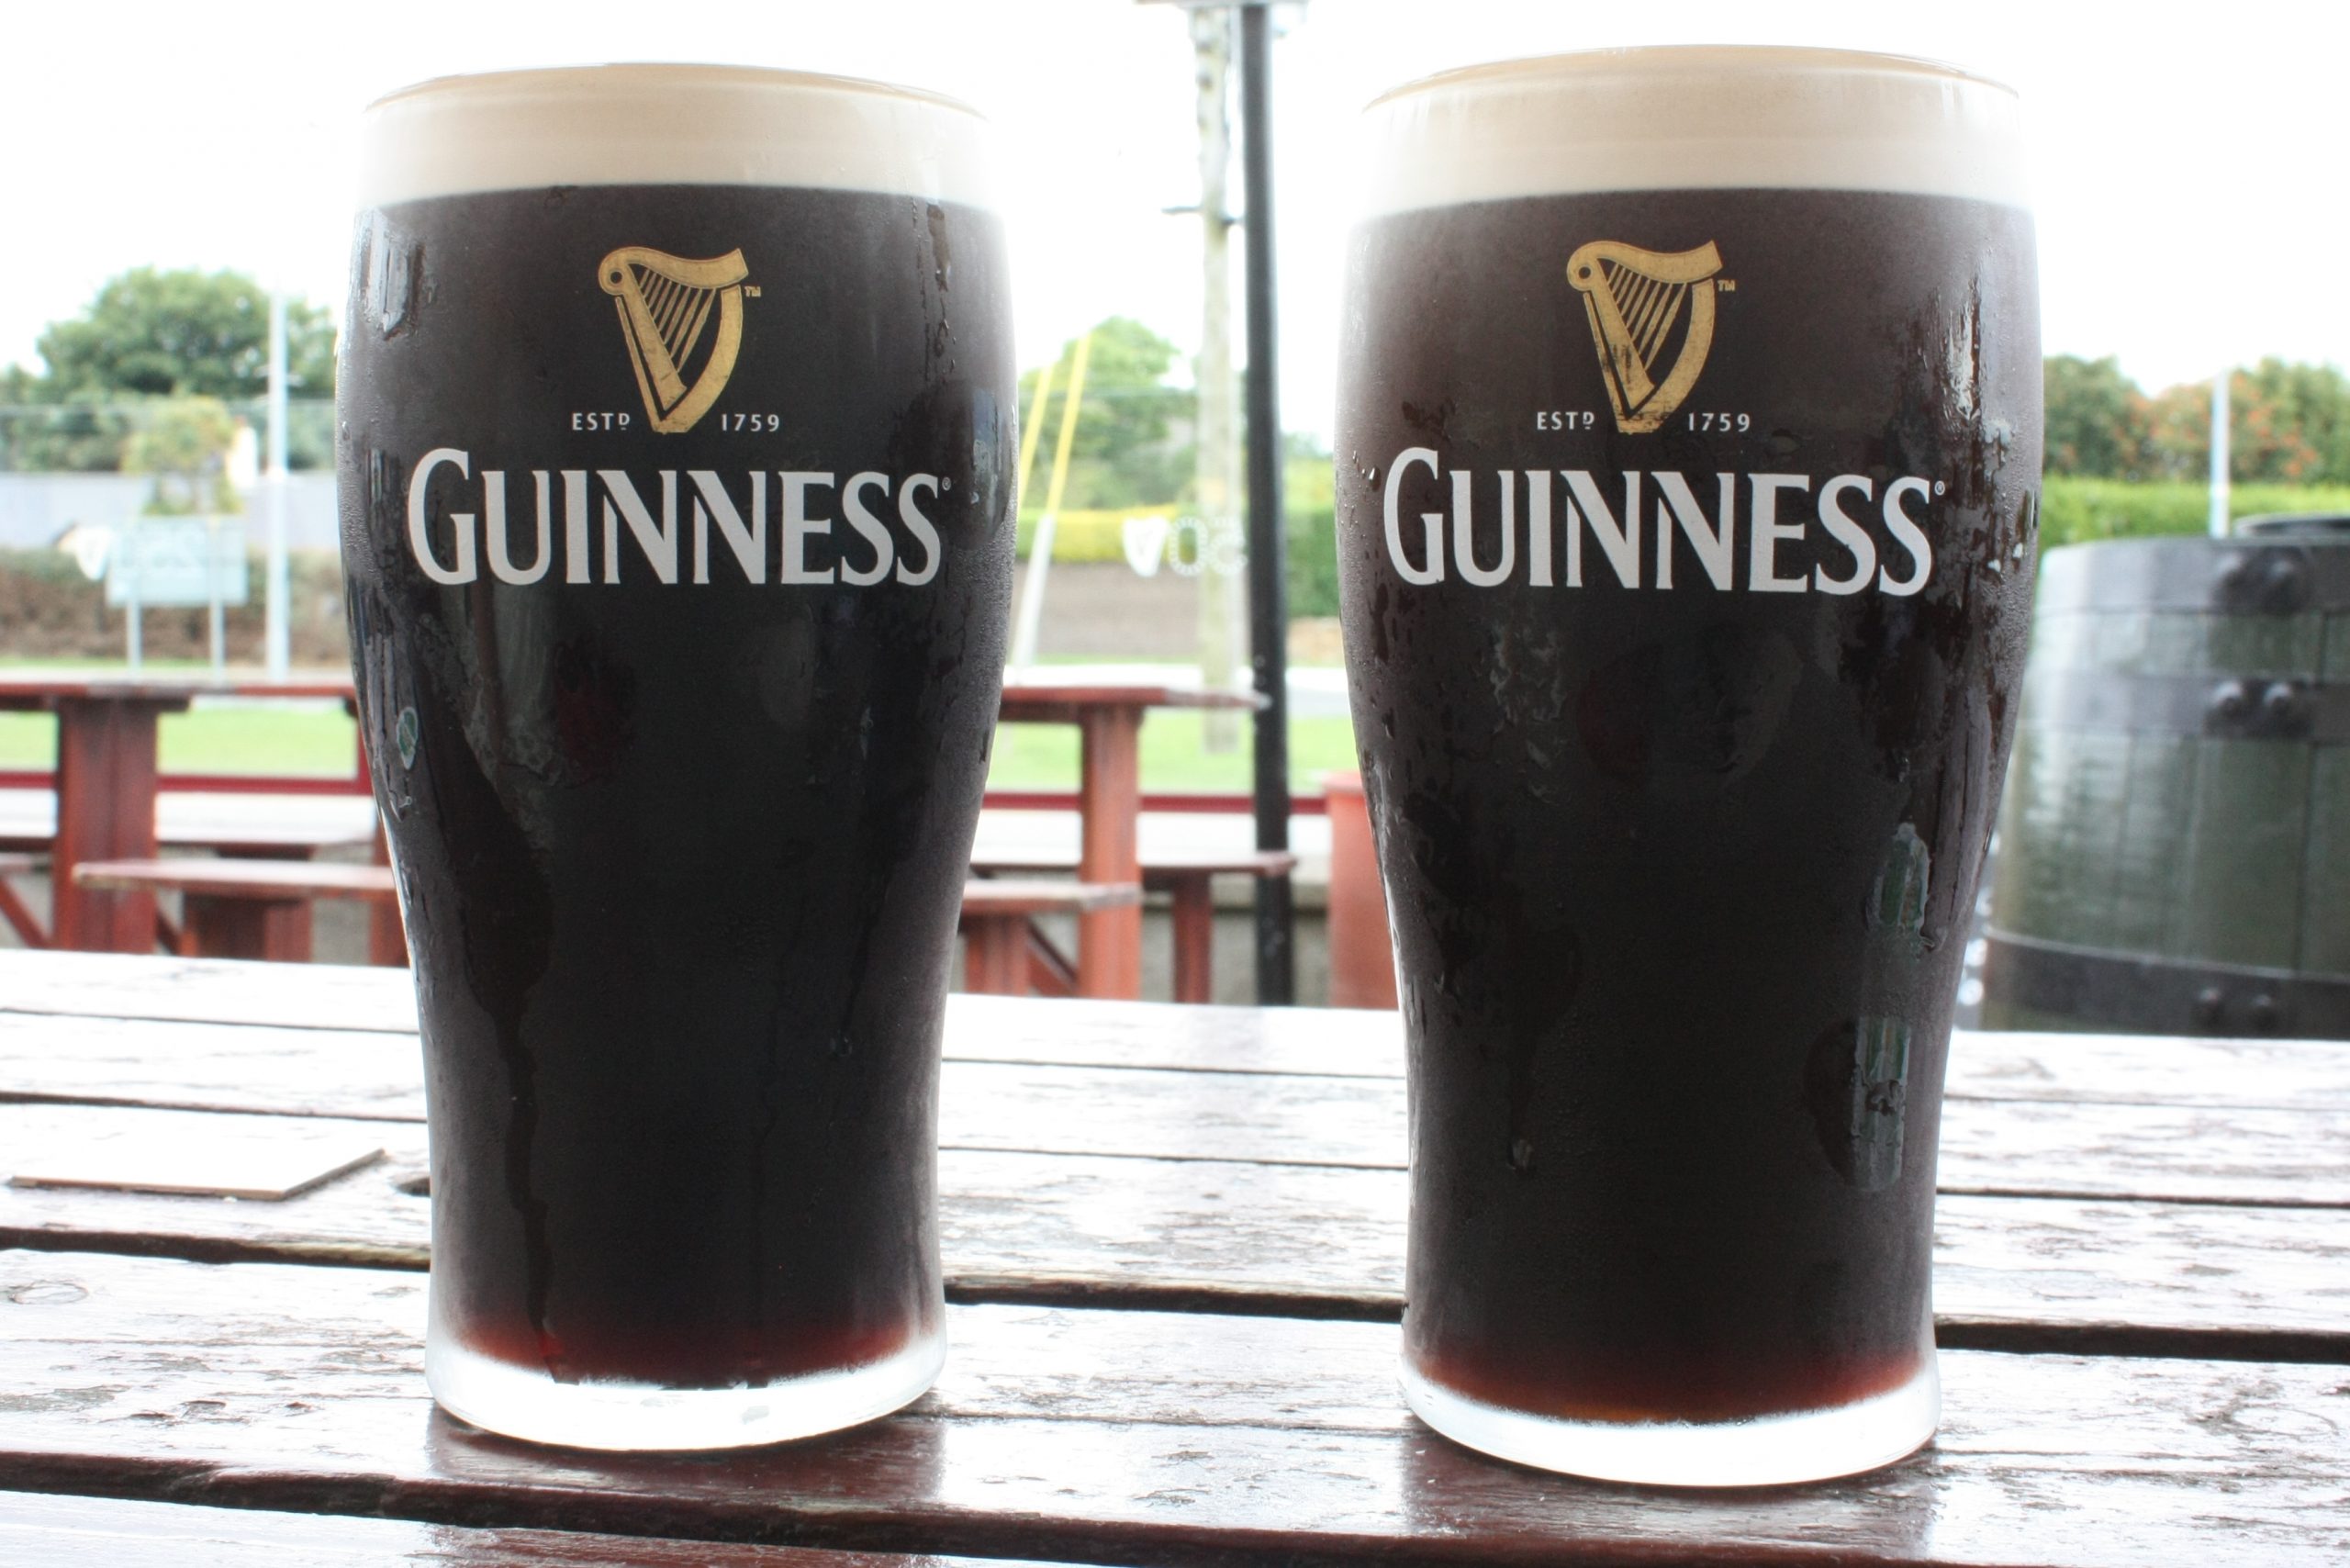 Guinness Draught in Ireland